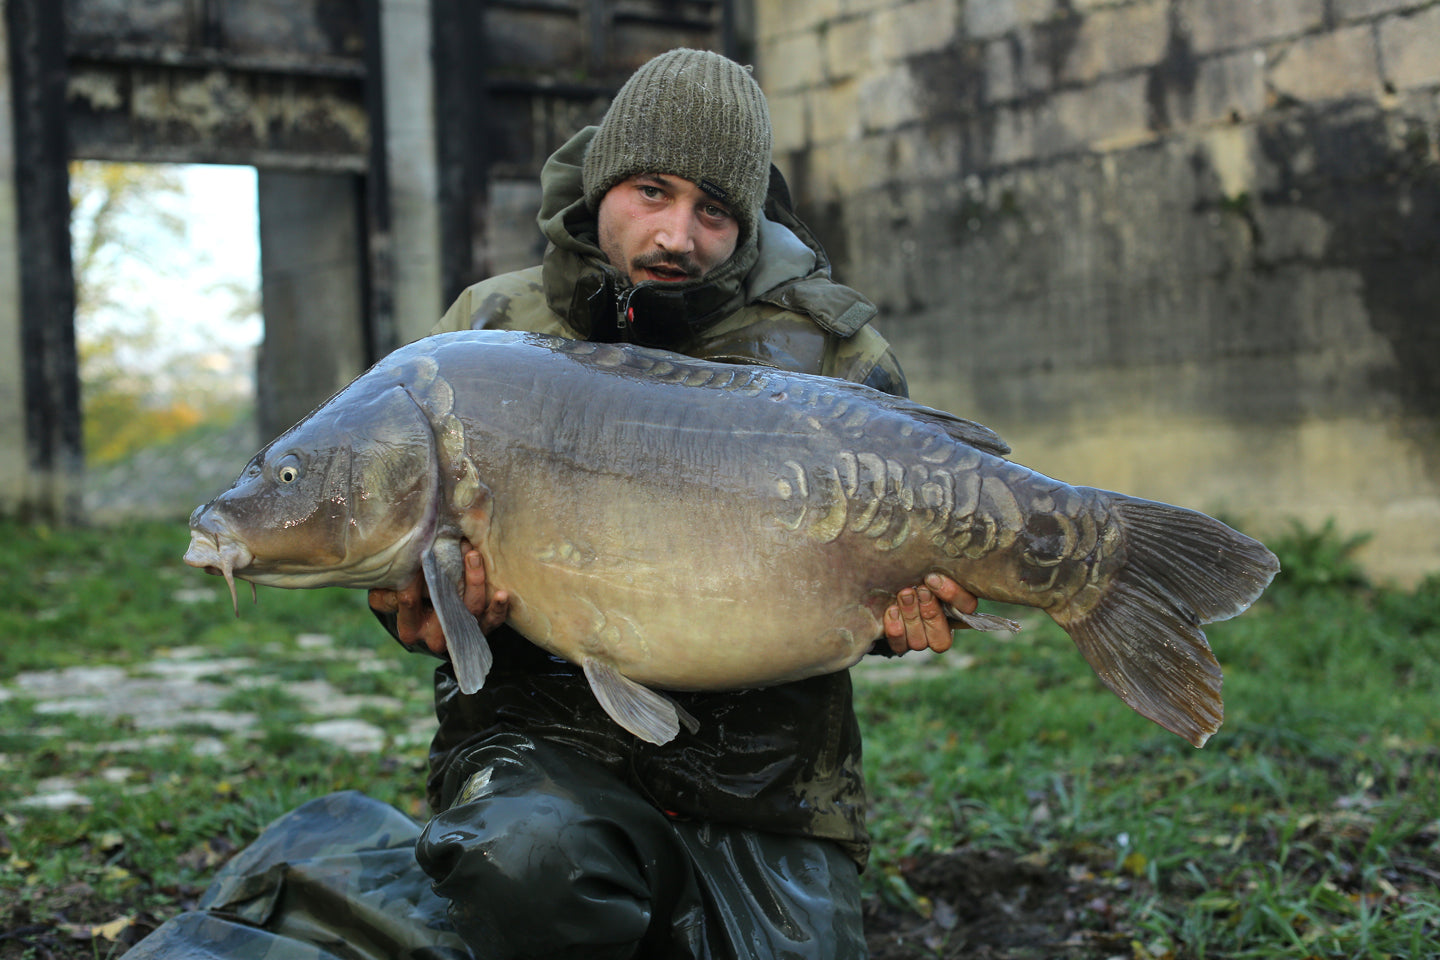 Chris's incredible old fifty pounder